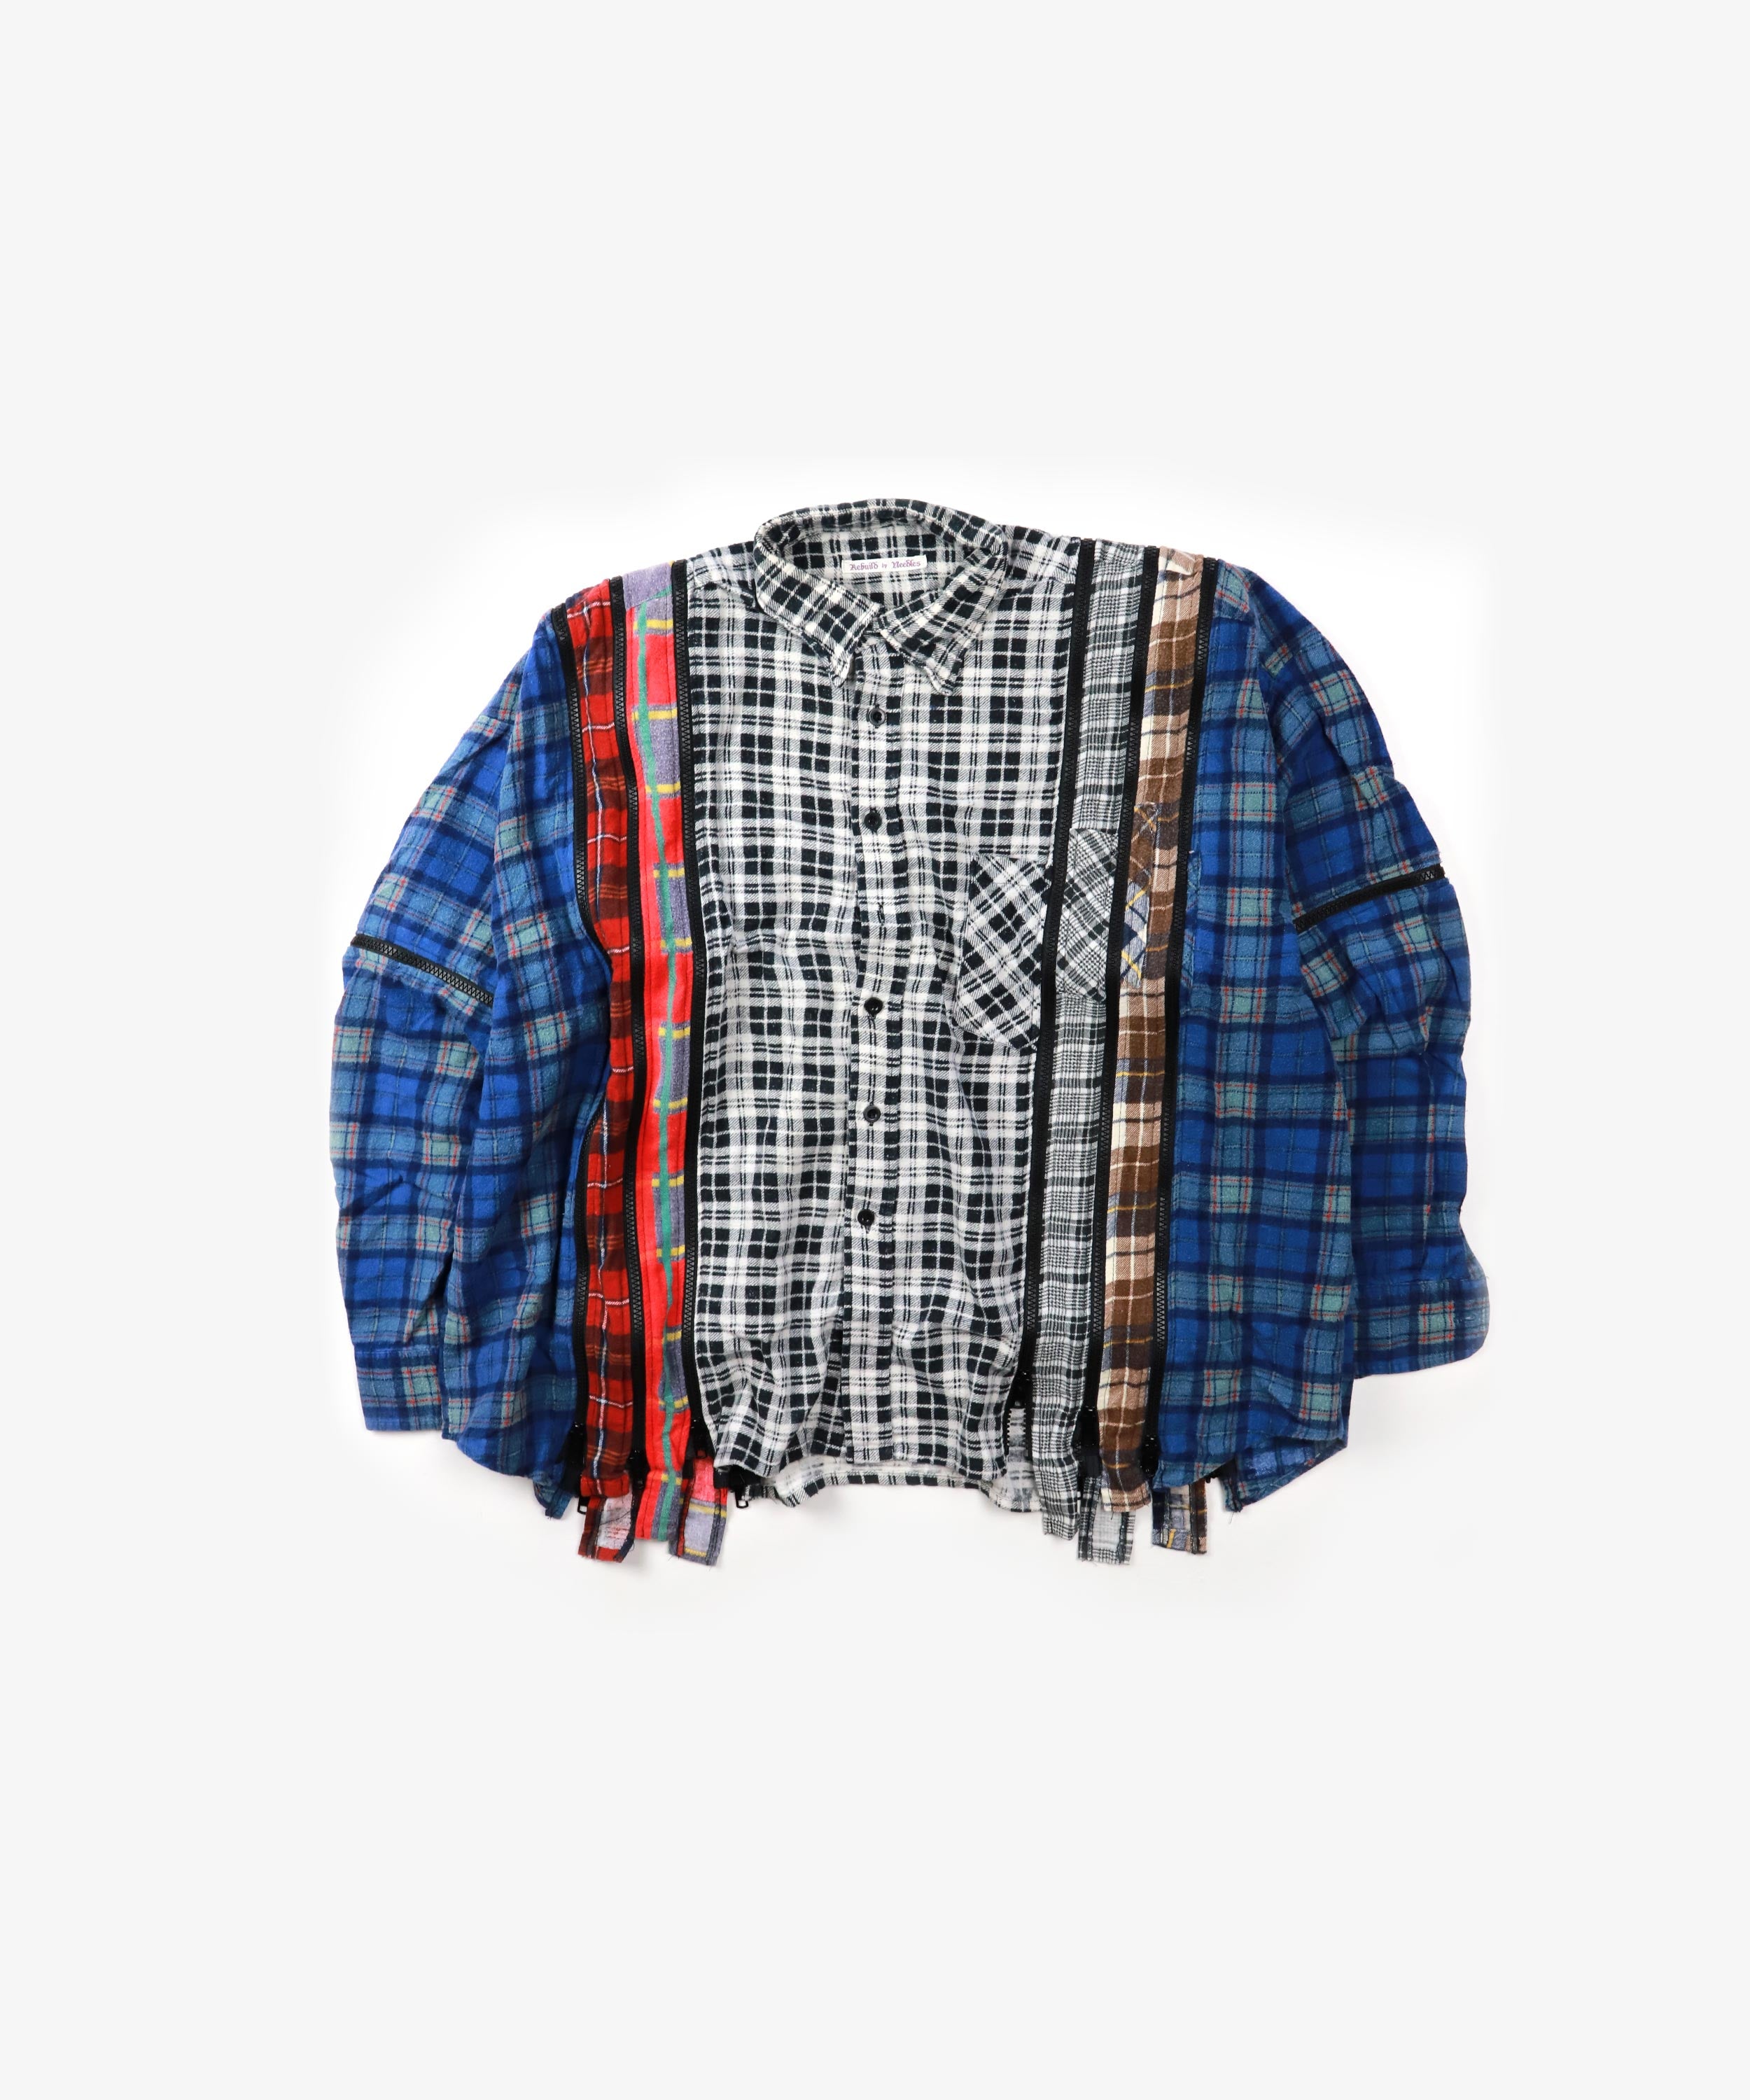 Rebuild by Needles Flannel Shirt -7 Cuts Wide / Zipped